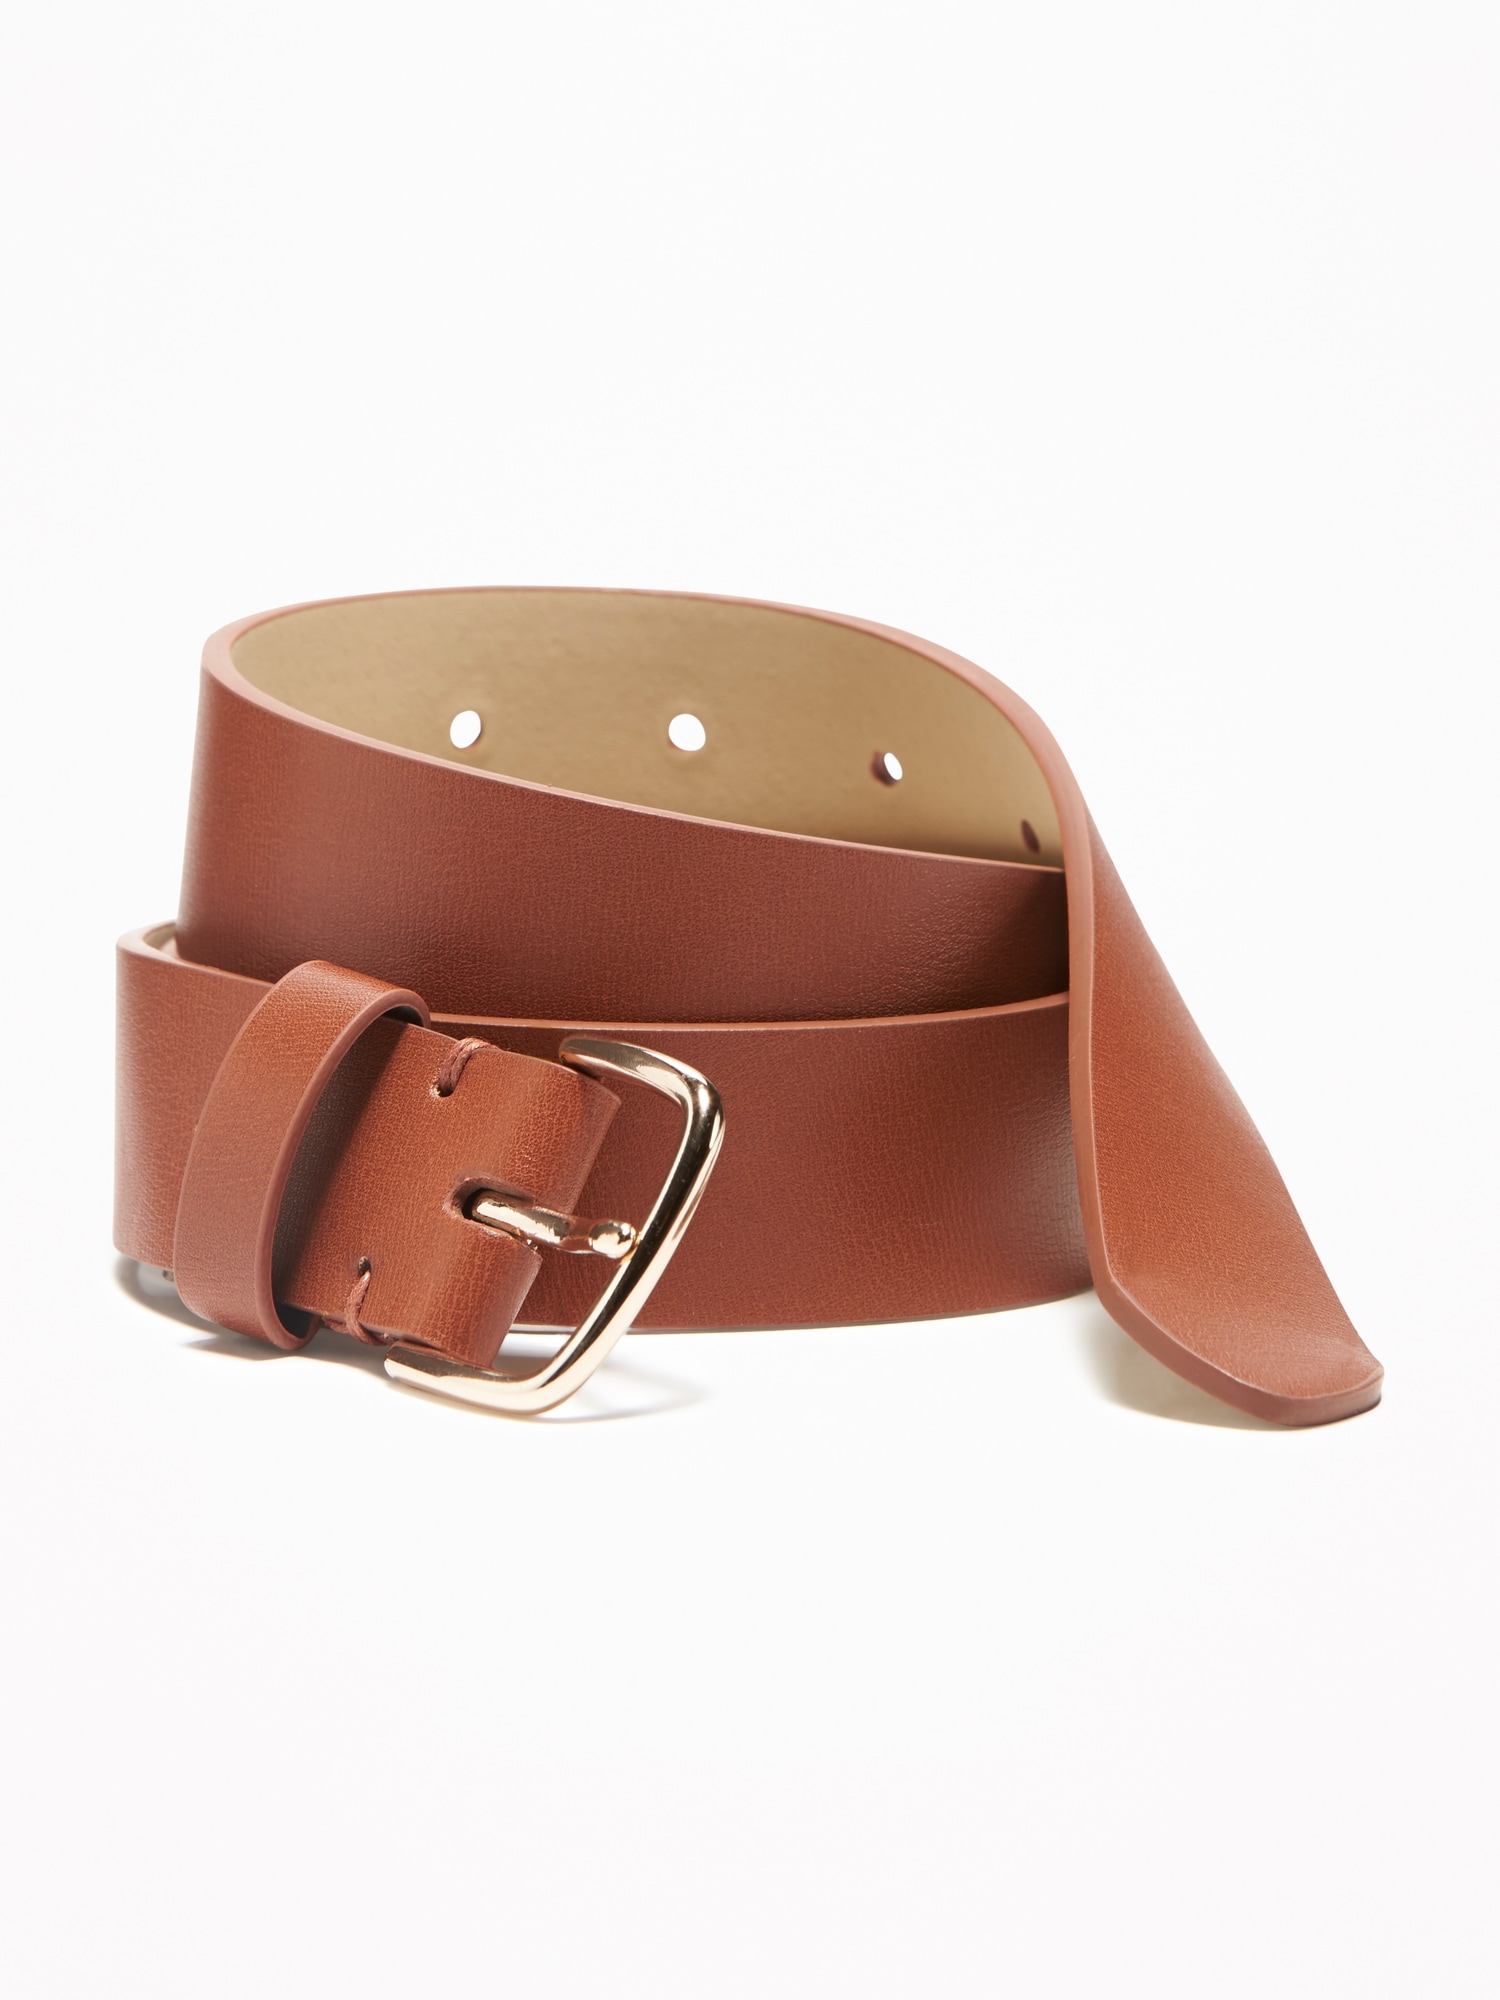 Old Navy Faux-Leather Belt For Women (1 1/4") brown. 1